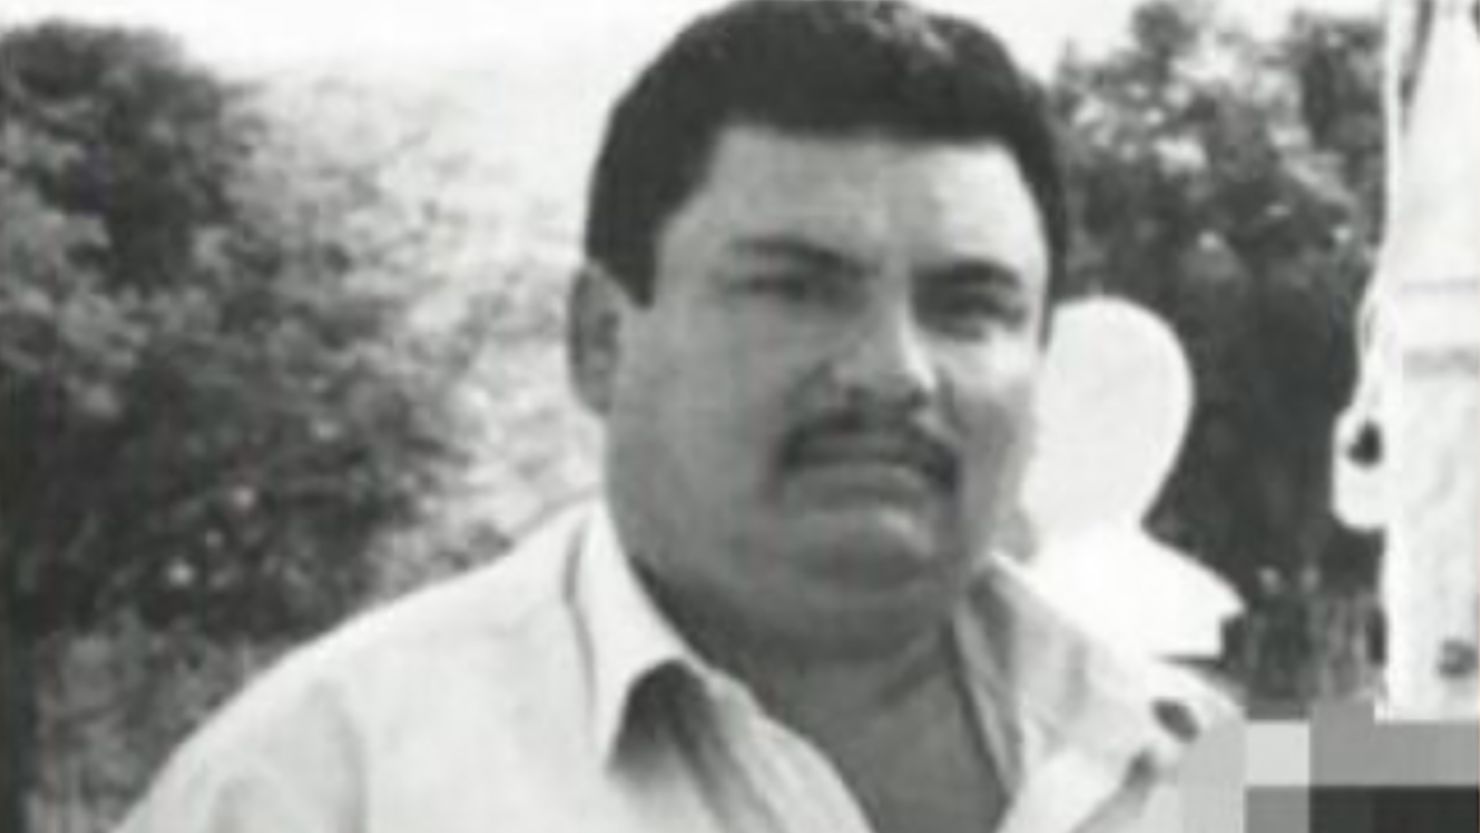 Aureliano Guzman-Loera, brother of El Chapo, and two others have been indicted on drug trafficking charges.